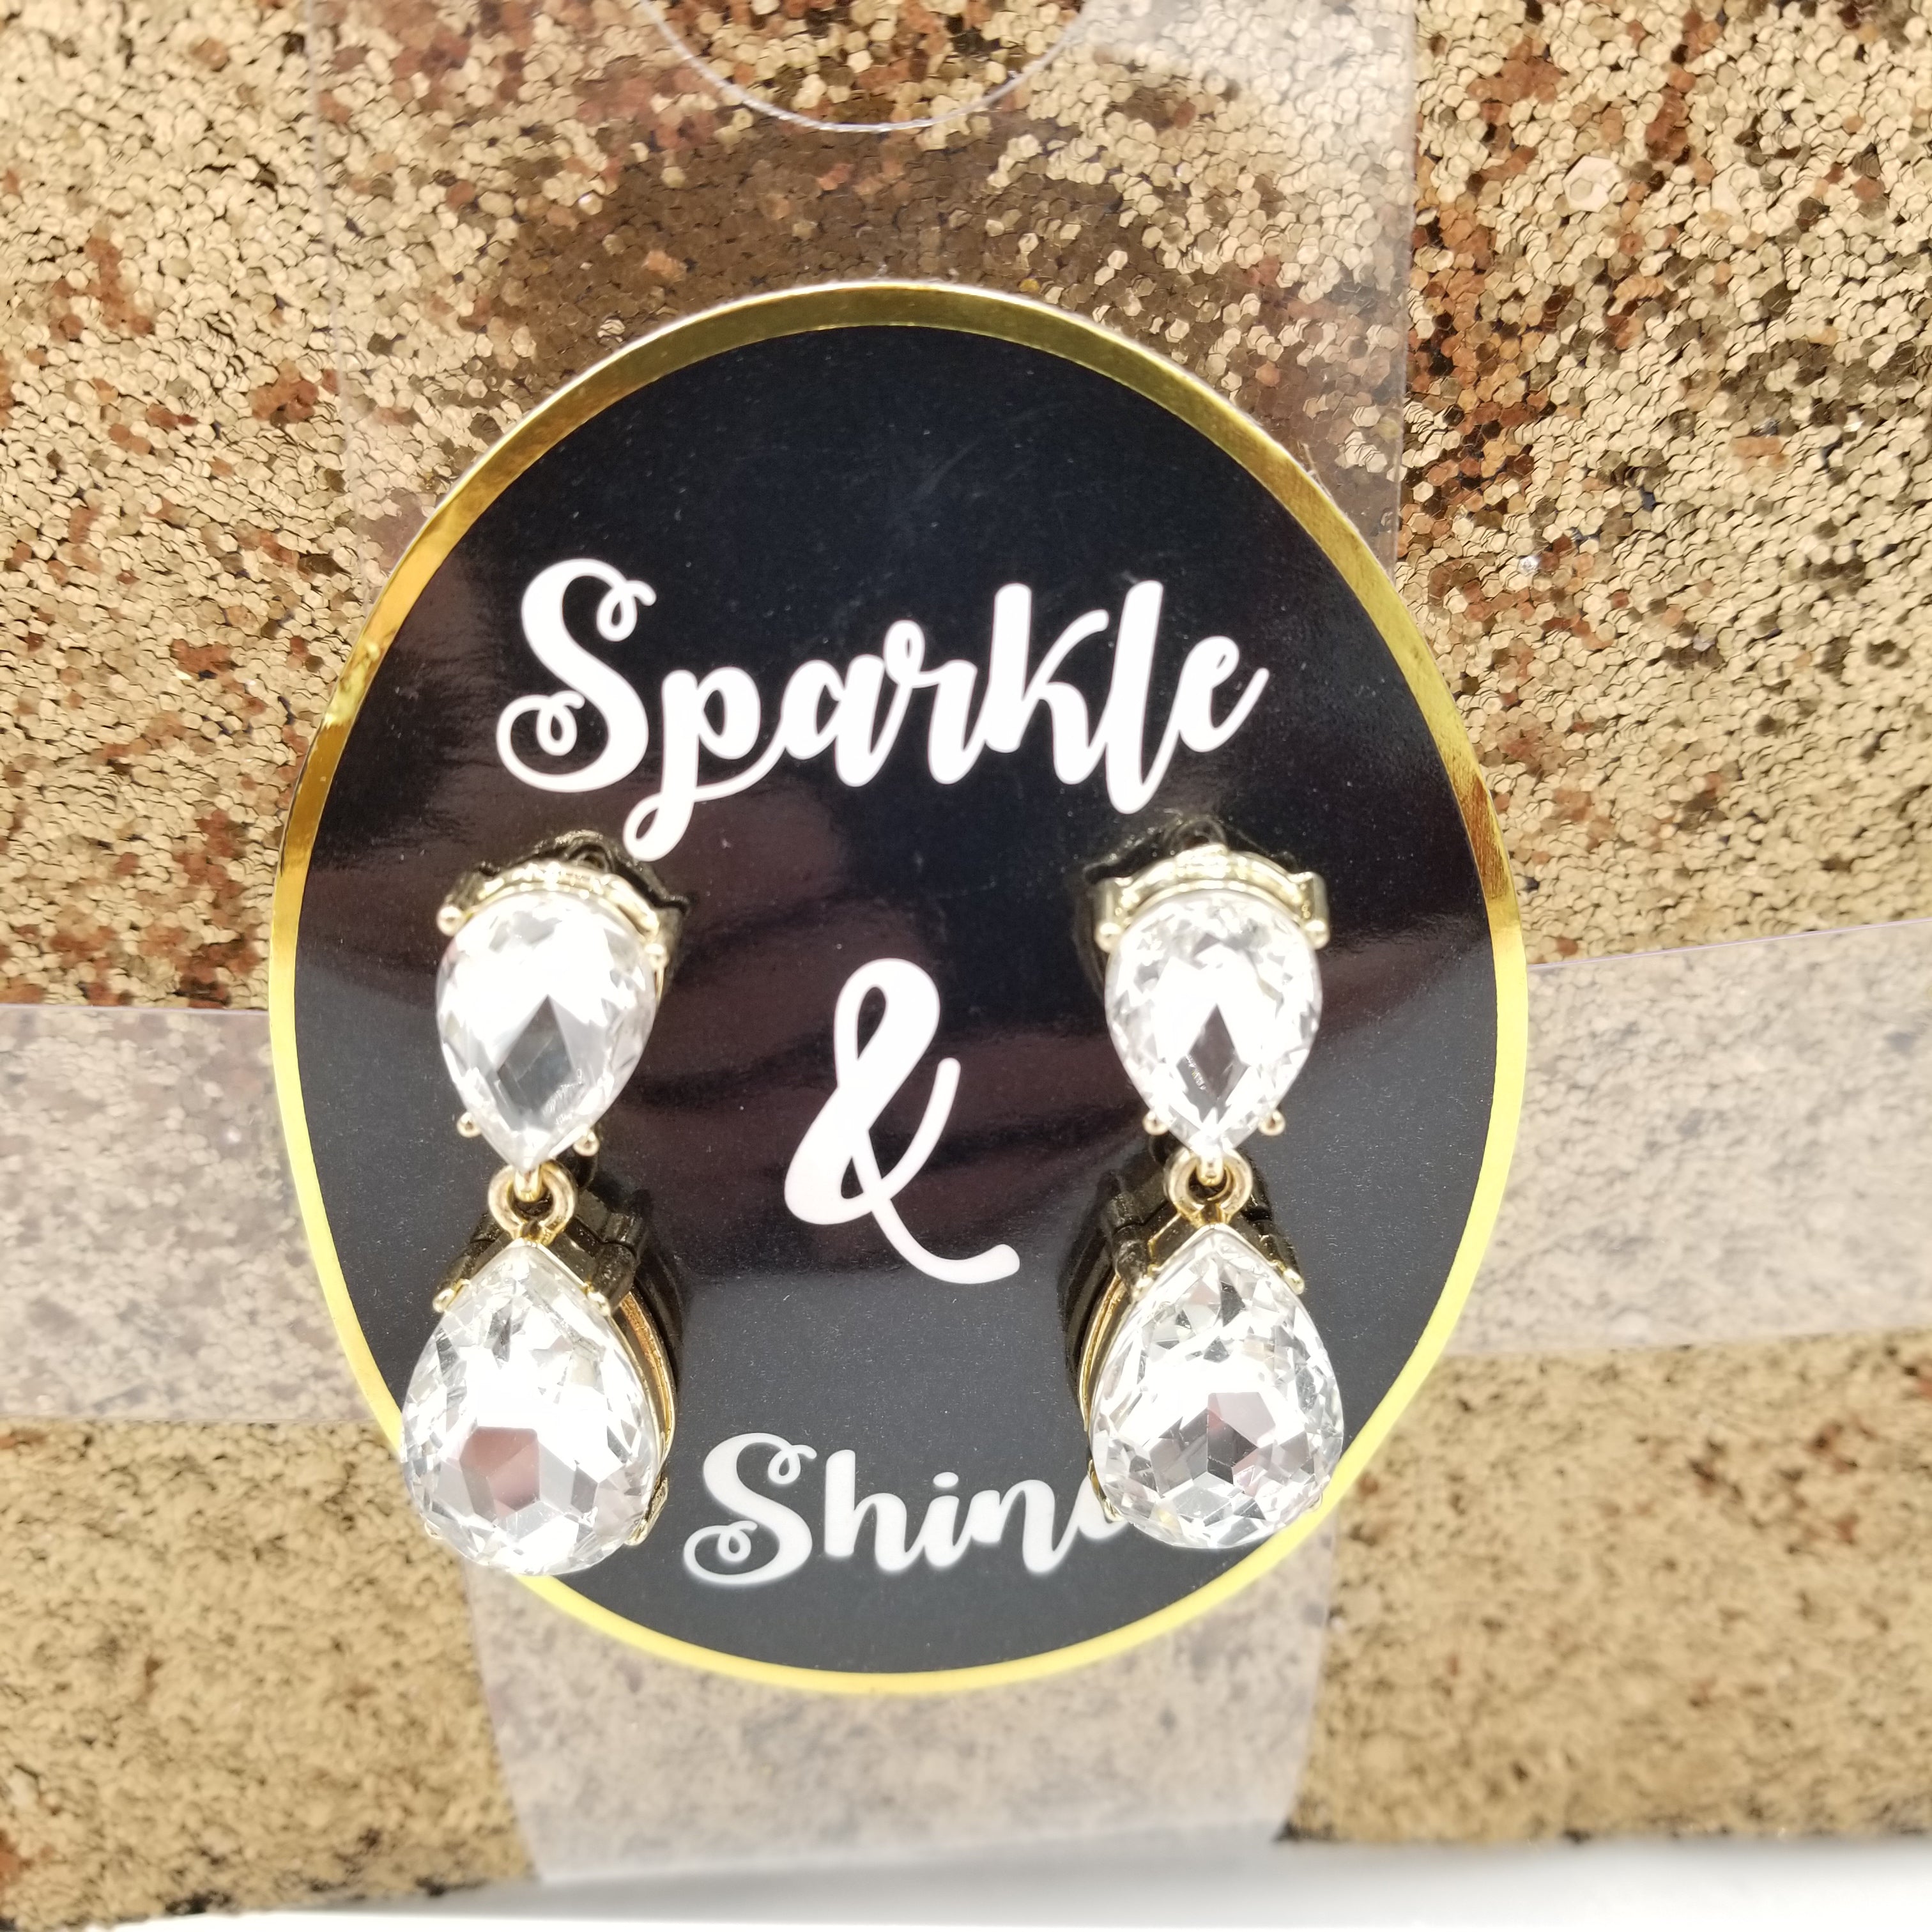 SPARKLE & SHINE Cosmetic Make-up Bag and Earrings --8 x 5 in--Gold